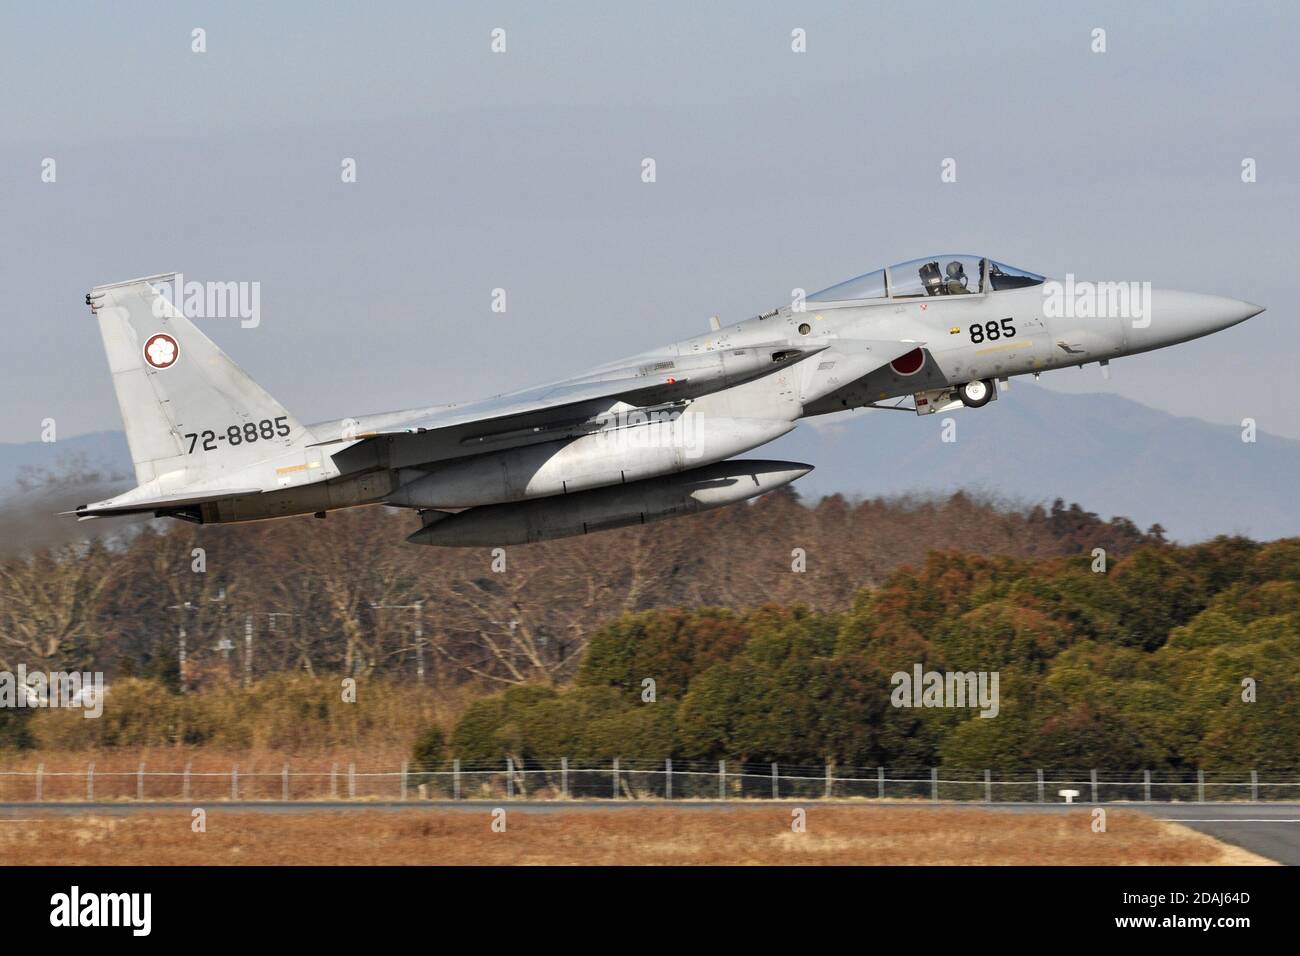 McDONNELL-DOUGLAS F-15J EAGLE OF THE 305 SQUADRON JAPANESE AIR SELF-DEFENSE FORCE (JASDF). Stock Photo